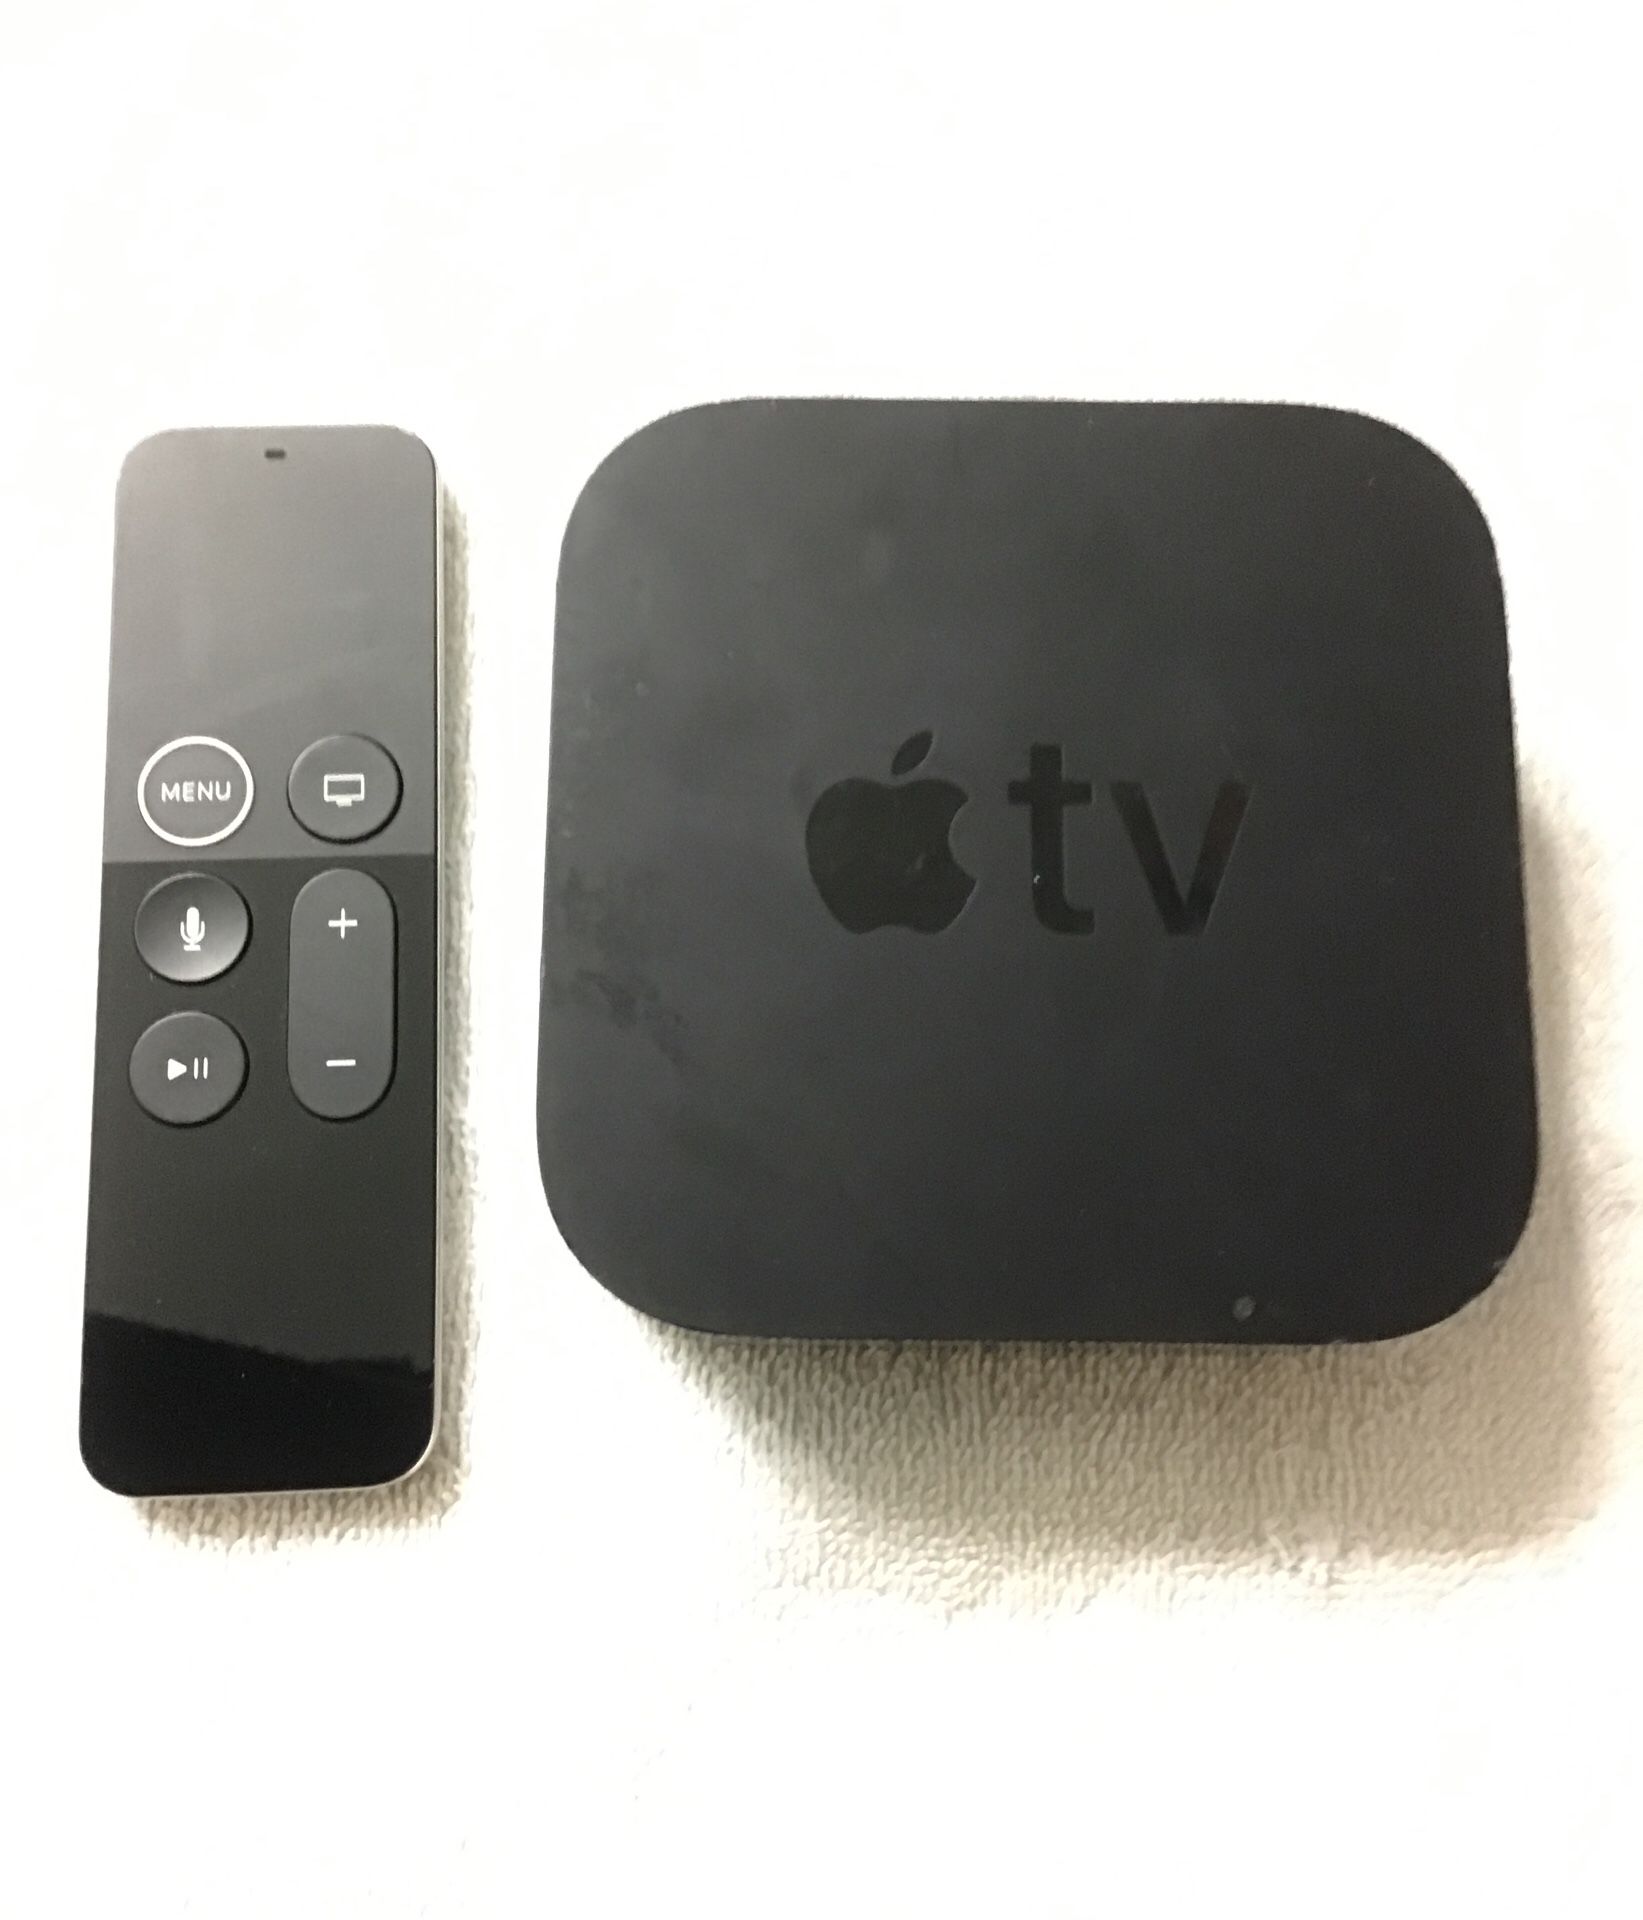 Apple TV Gen 5 4K Ultra High Definition!! Comes With Remote and Cables!!! 32GB Memory!!! Perfect Condition!!!